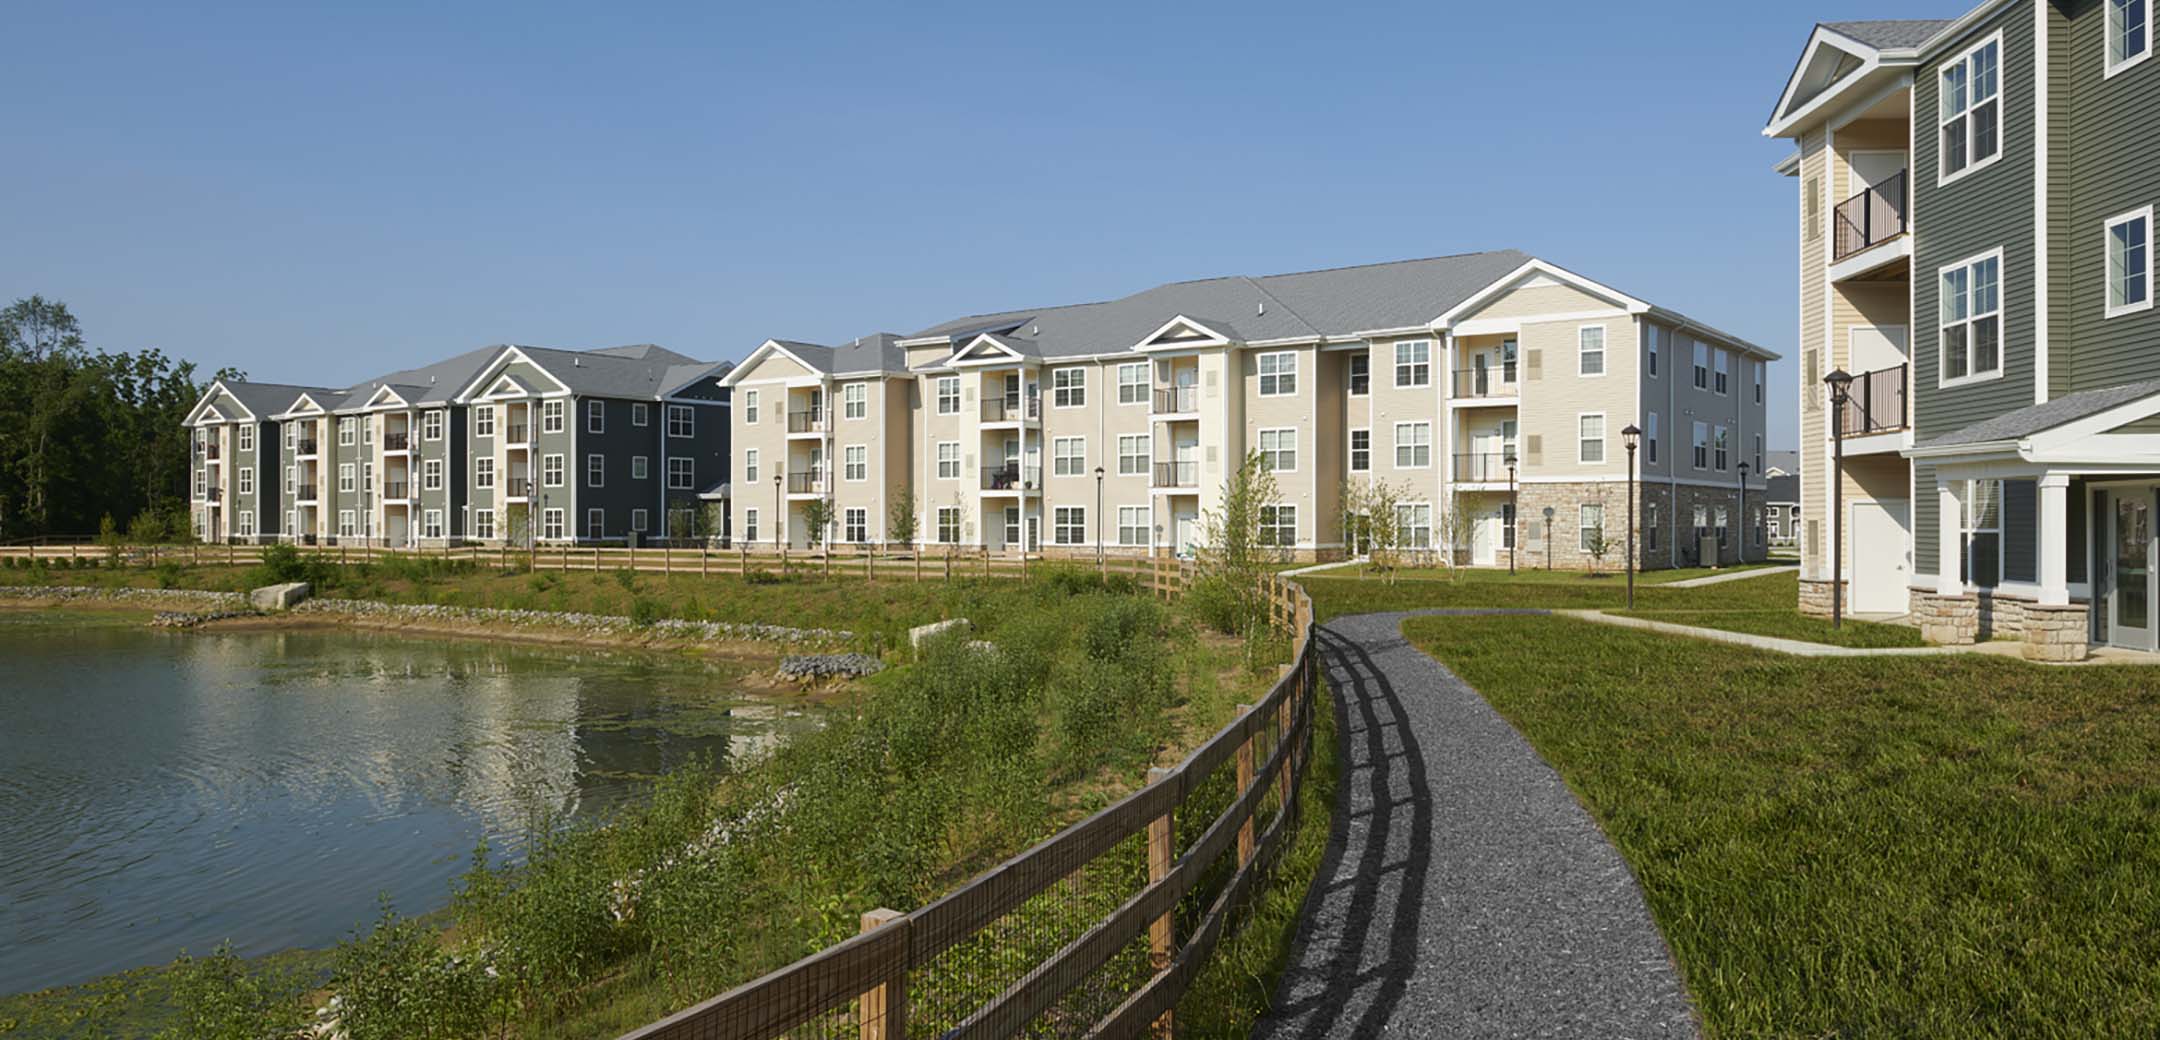 An angled view of the Signature Place MtLaurel apartments showcasing the pond side fenced off path and open grass areas.